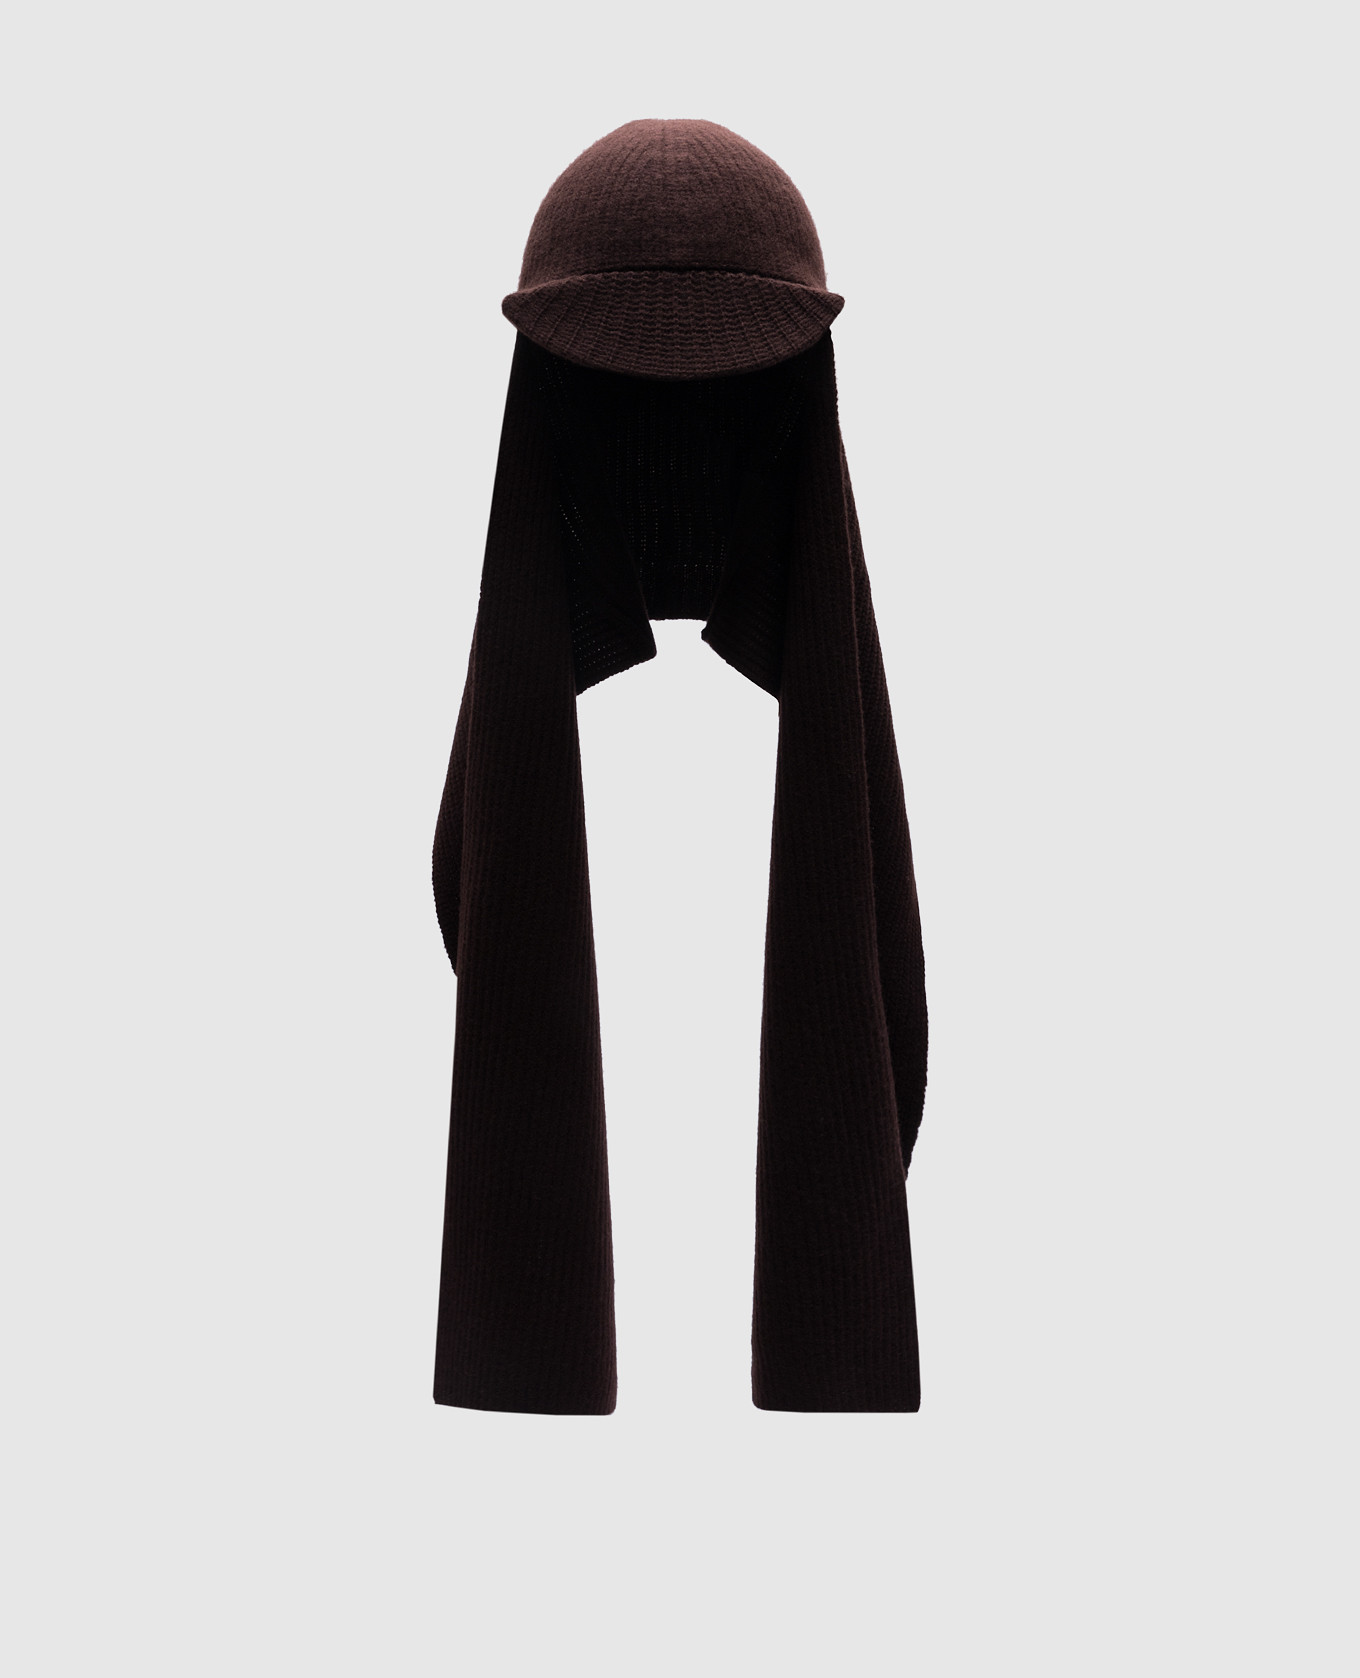 A burgundy hat with a wool and cashmere scarf